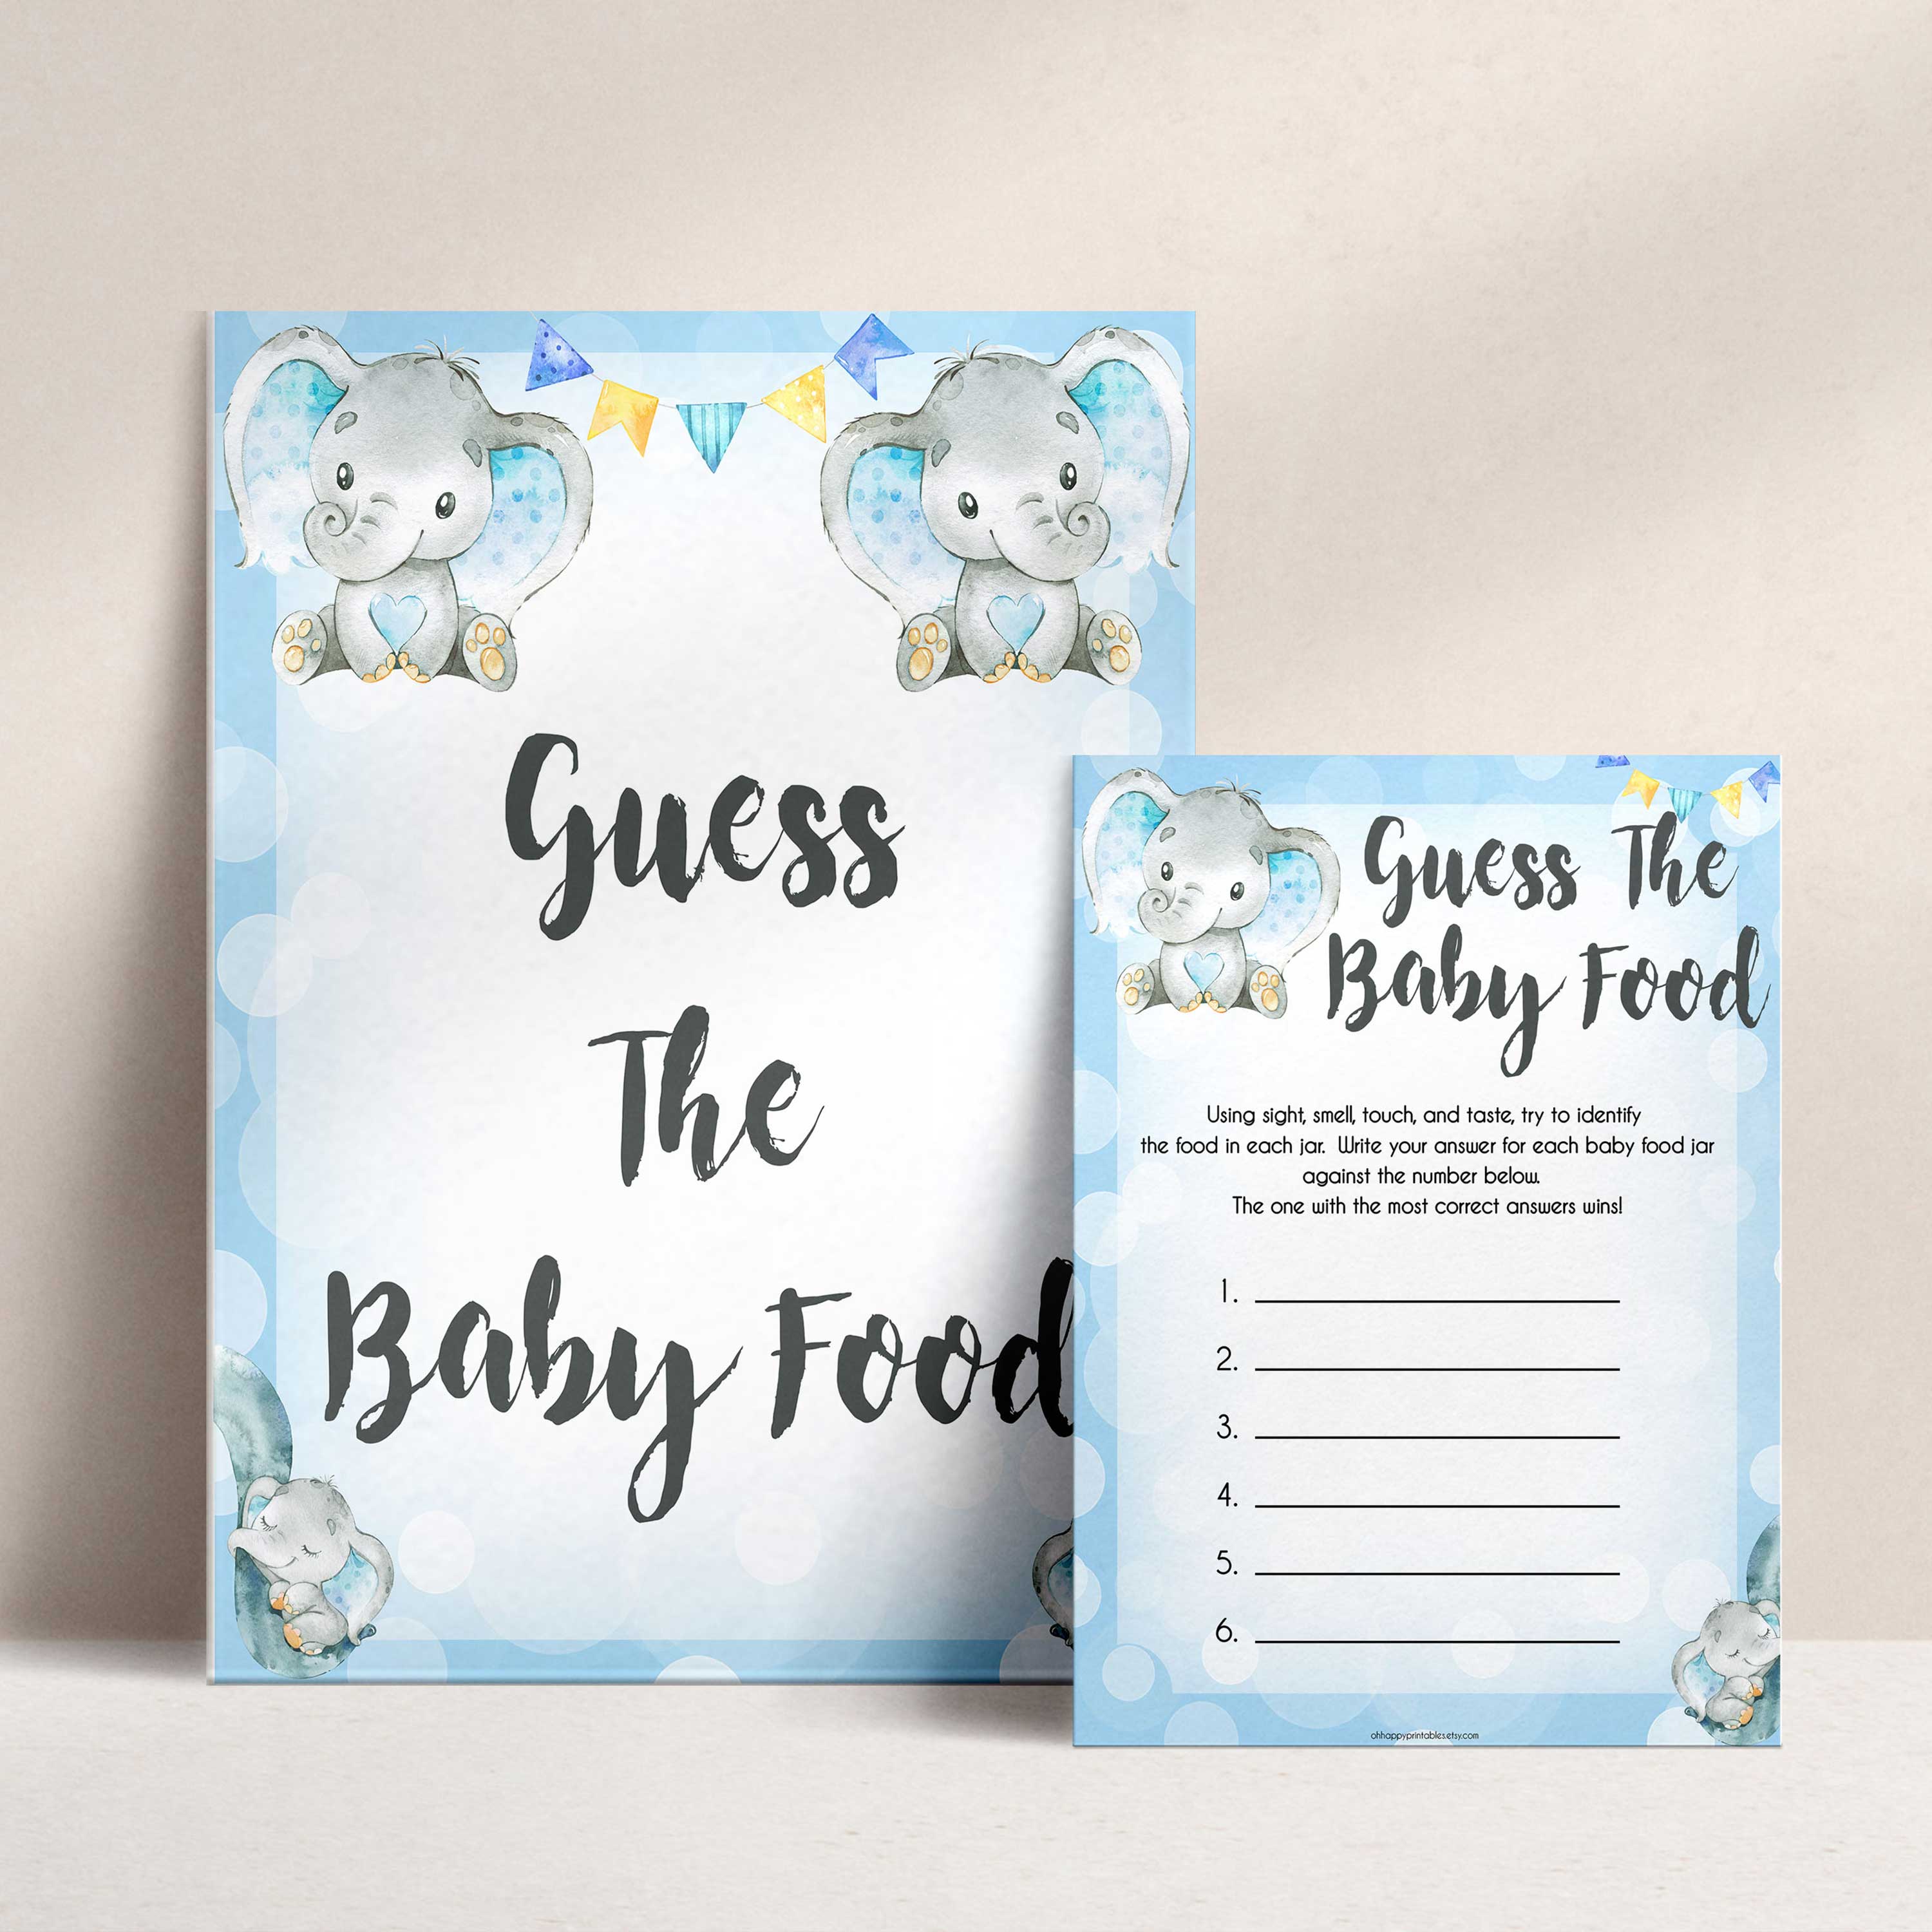 Blue elephant baby games, guess the baby food, elephant baby games, printable baby games, top baby games, best baby shower games, baby shower ideas, fun baby games, elephant baby shower